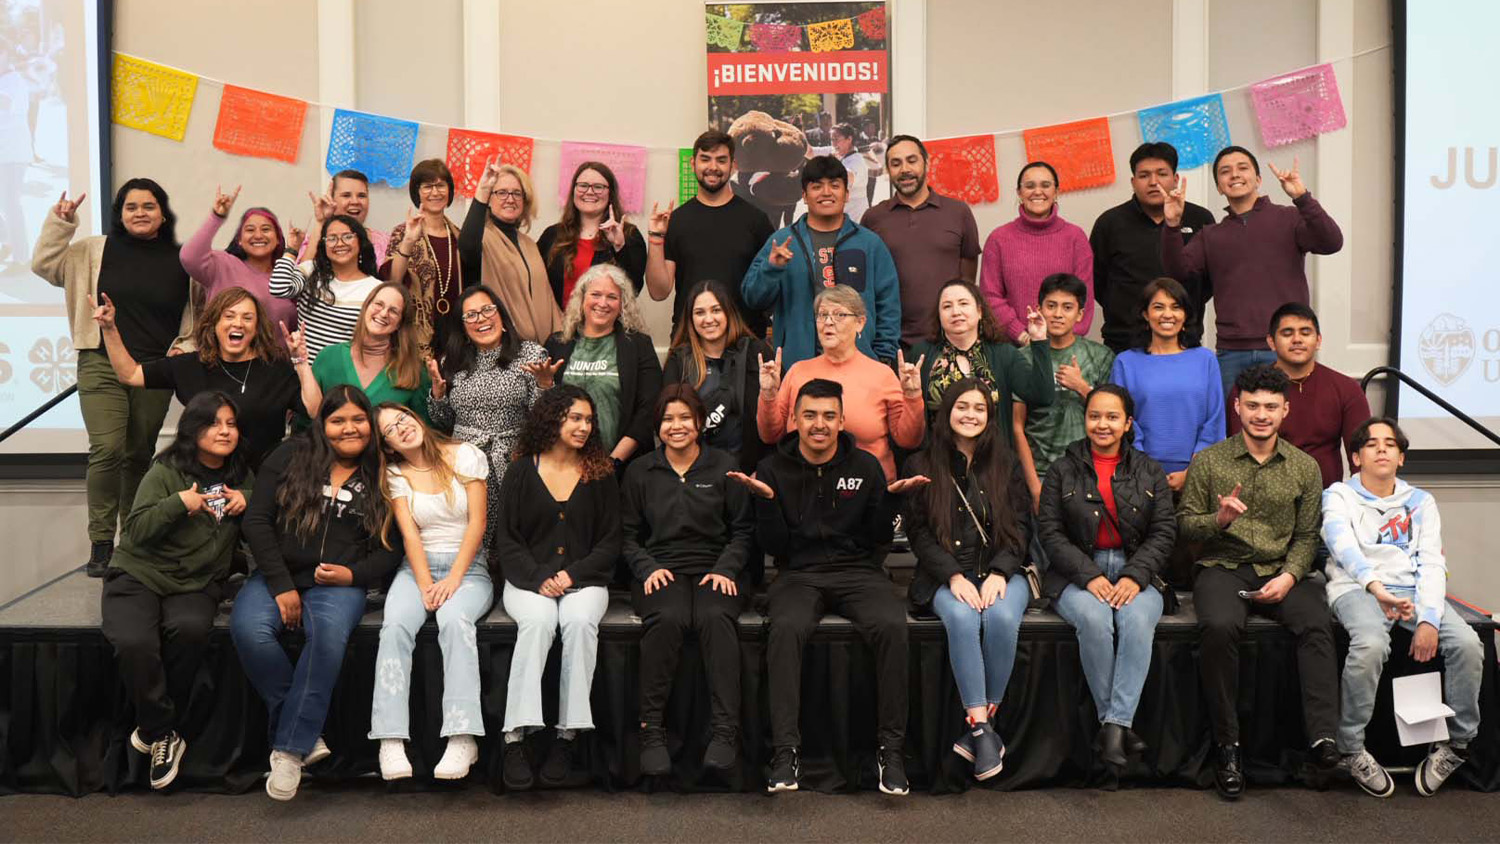 A large group of students and professionals pose for a photo in front of a banner that reads "Bienvenidos!"